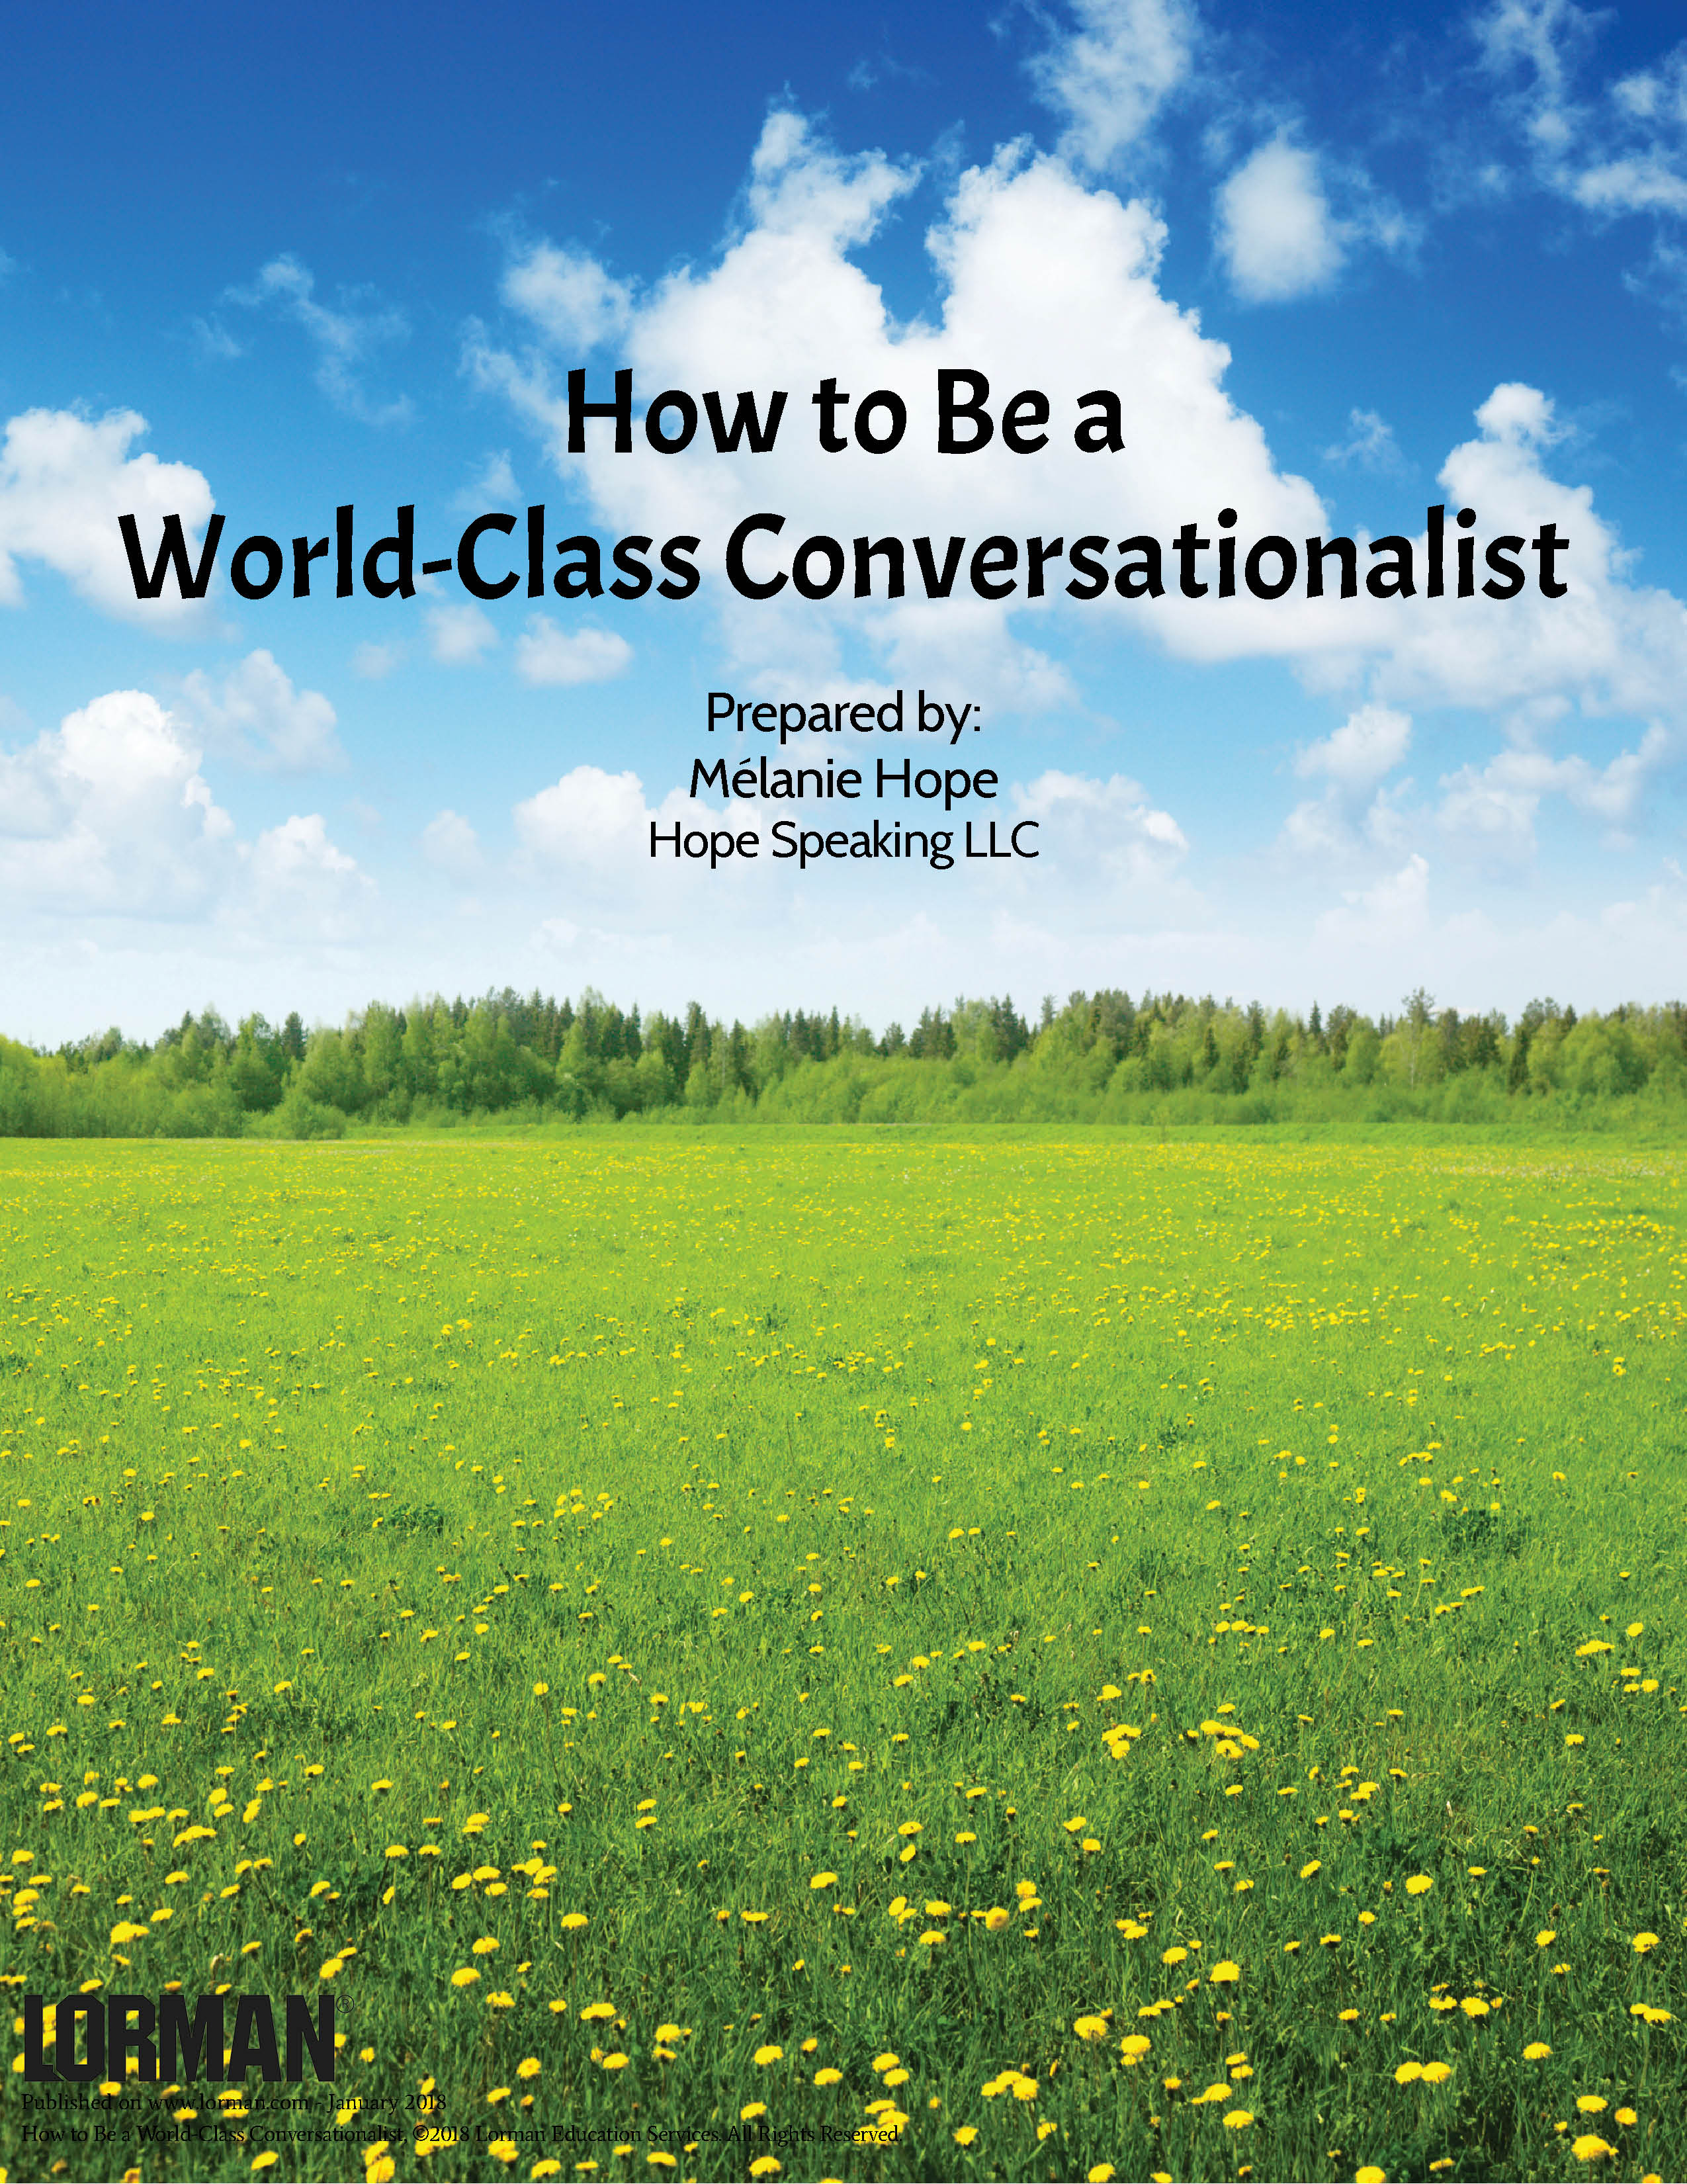 How to Be a World-Class Conversationalist